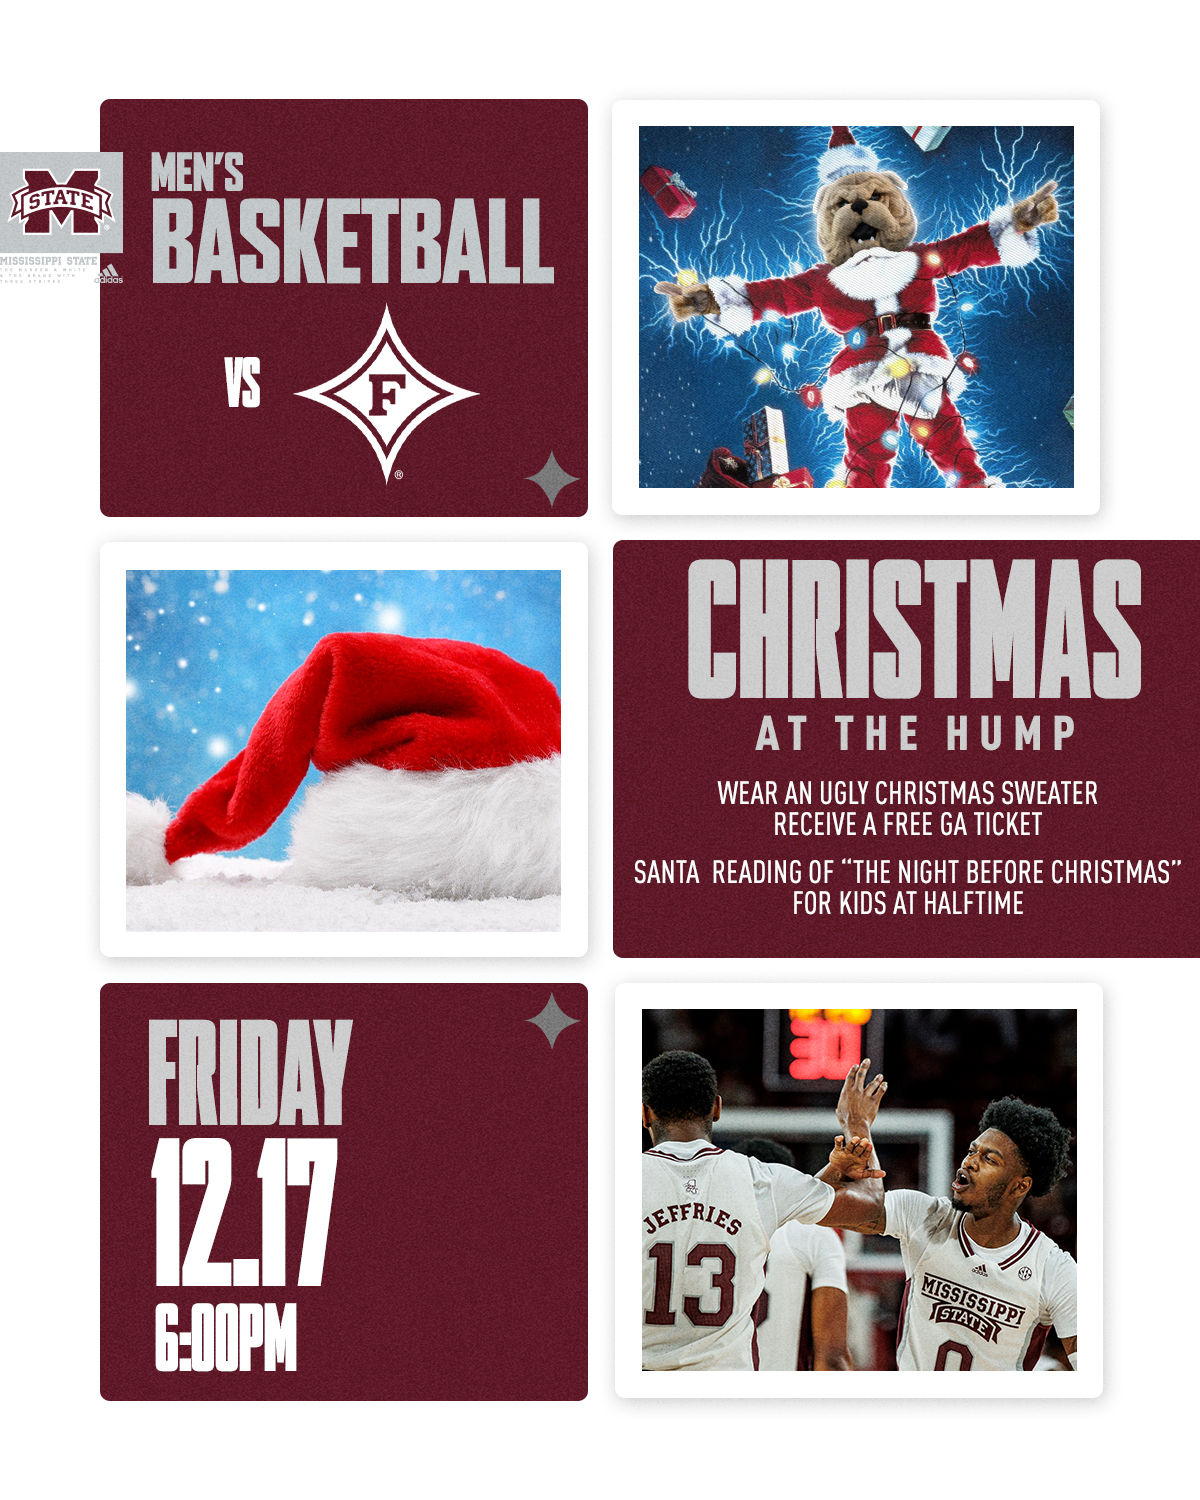 Christmas at the Hump graphic with image of Bully in a Santa suit wrapped in Christmas lights